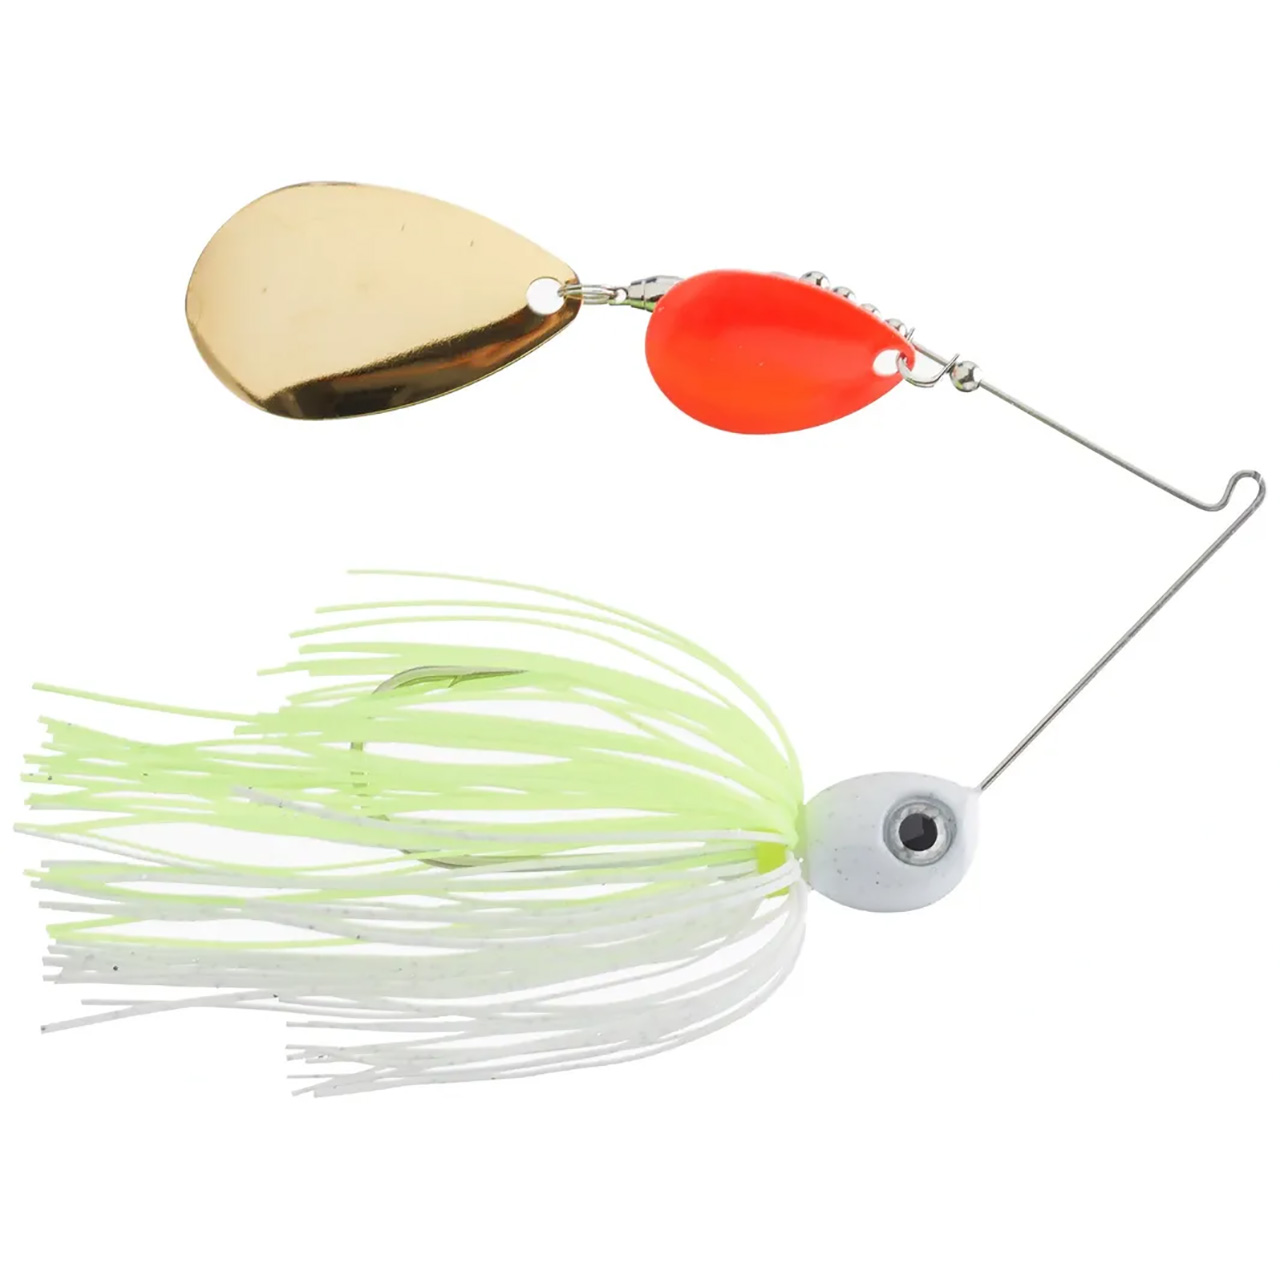 10 WATERMELON WITH ORANGE TAIL SILICONE SKIRTS FOR FISHING LURES